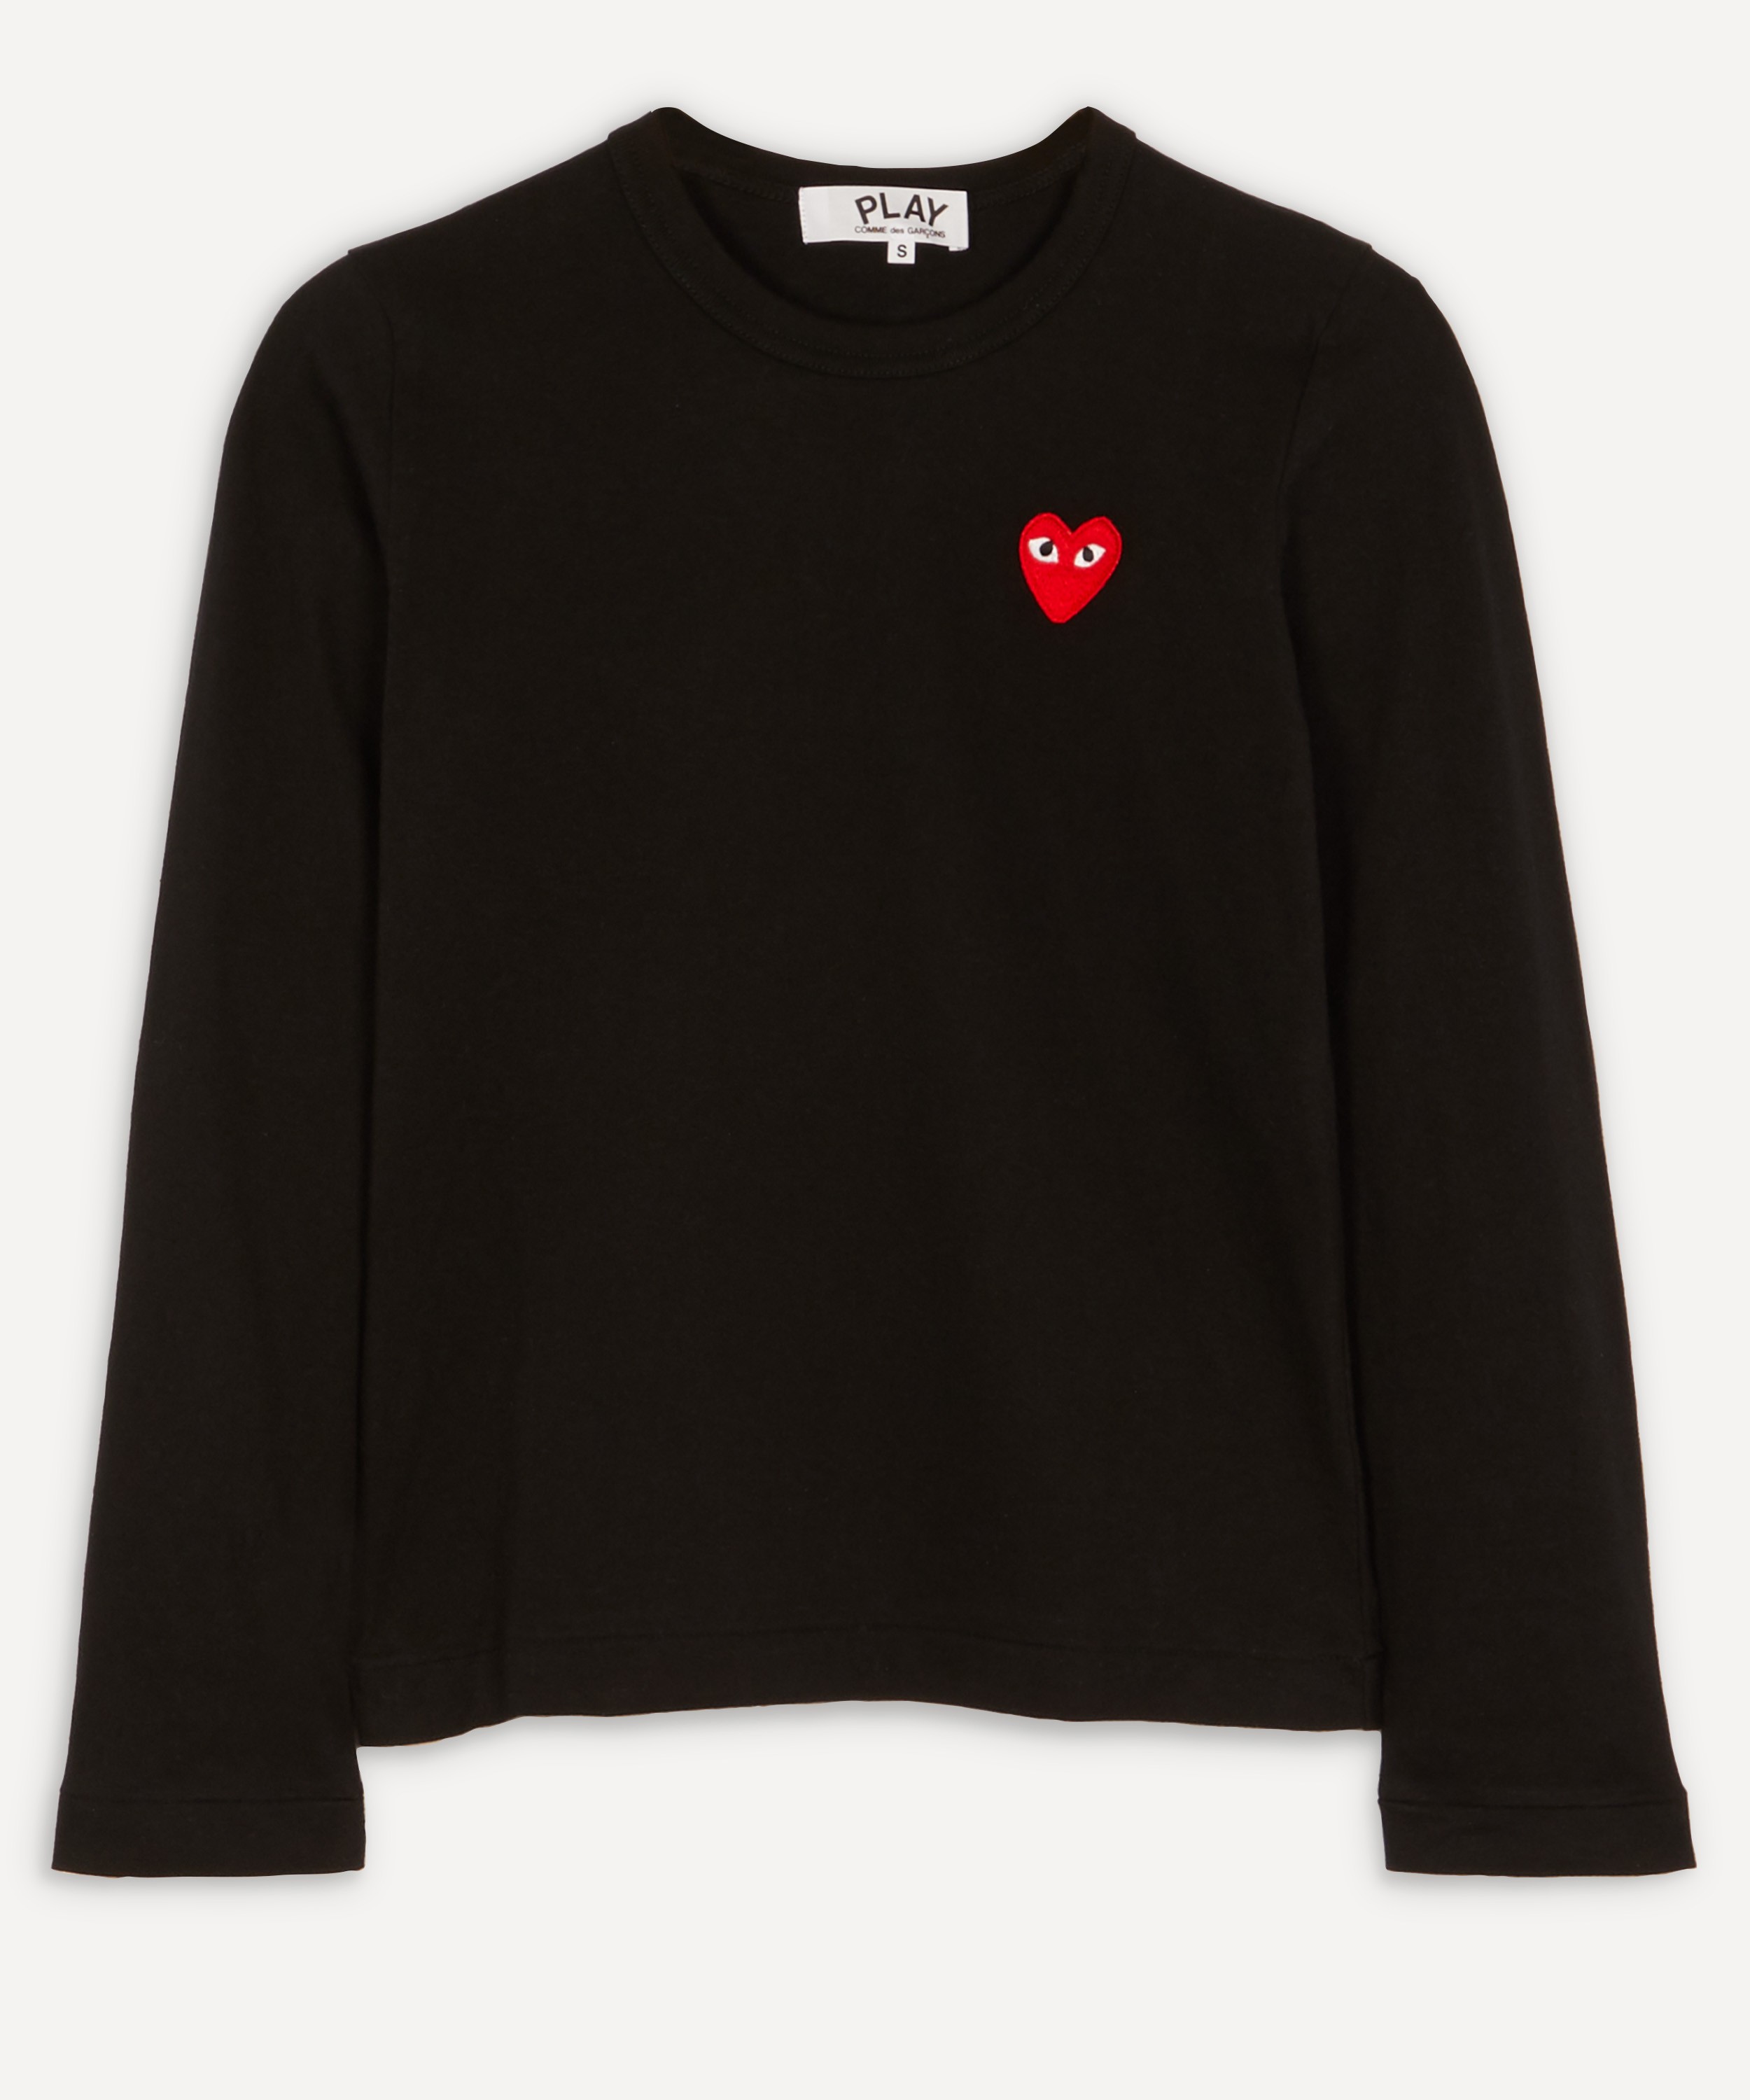 Comme des Garçons Play - Long-Sleeve T-Shirt image number null